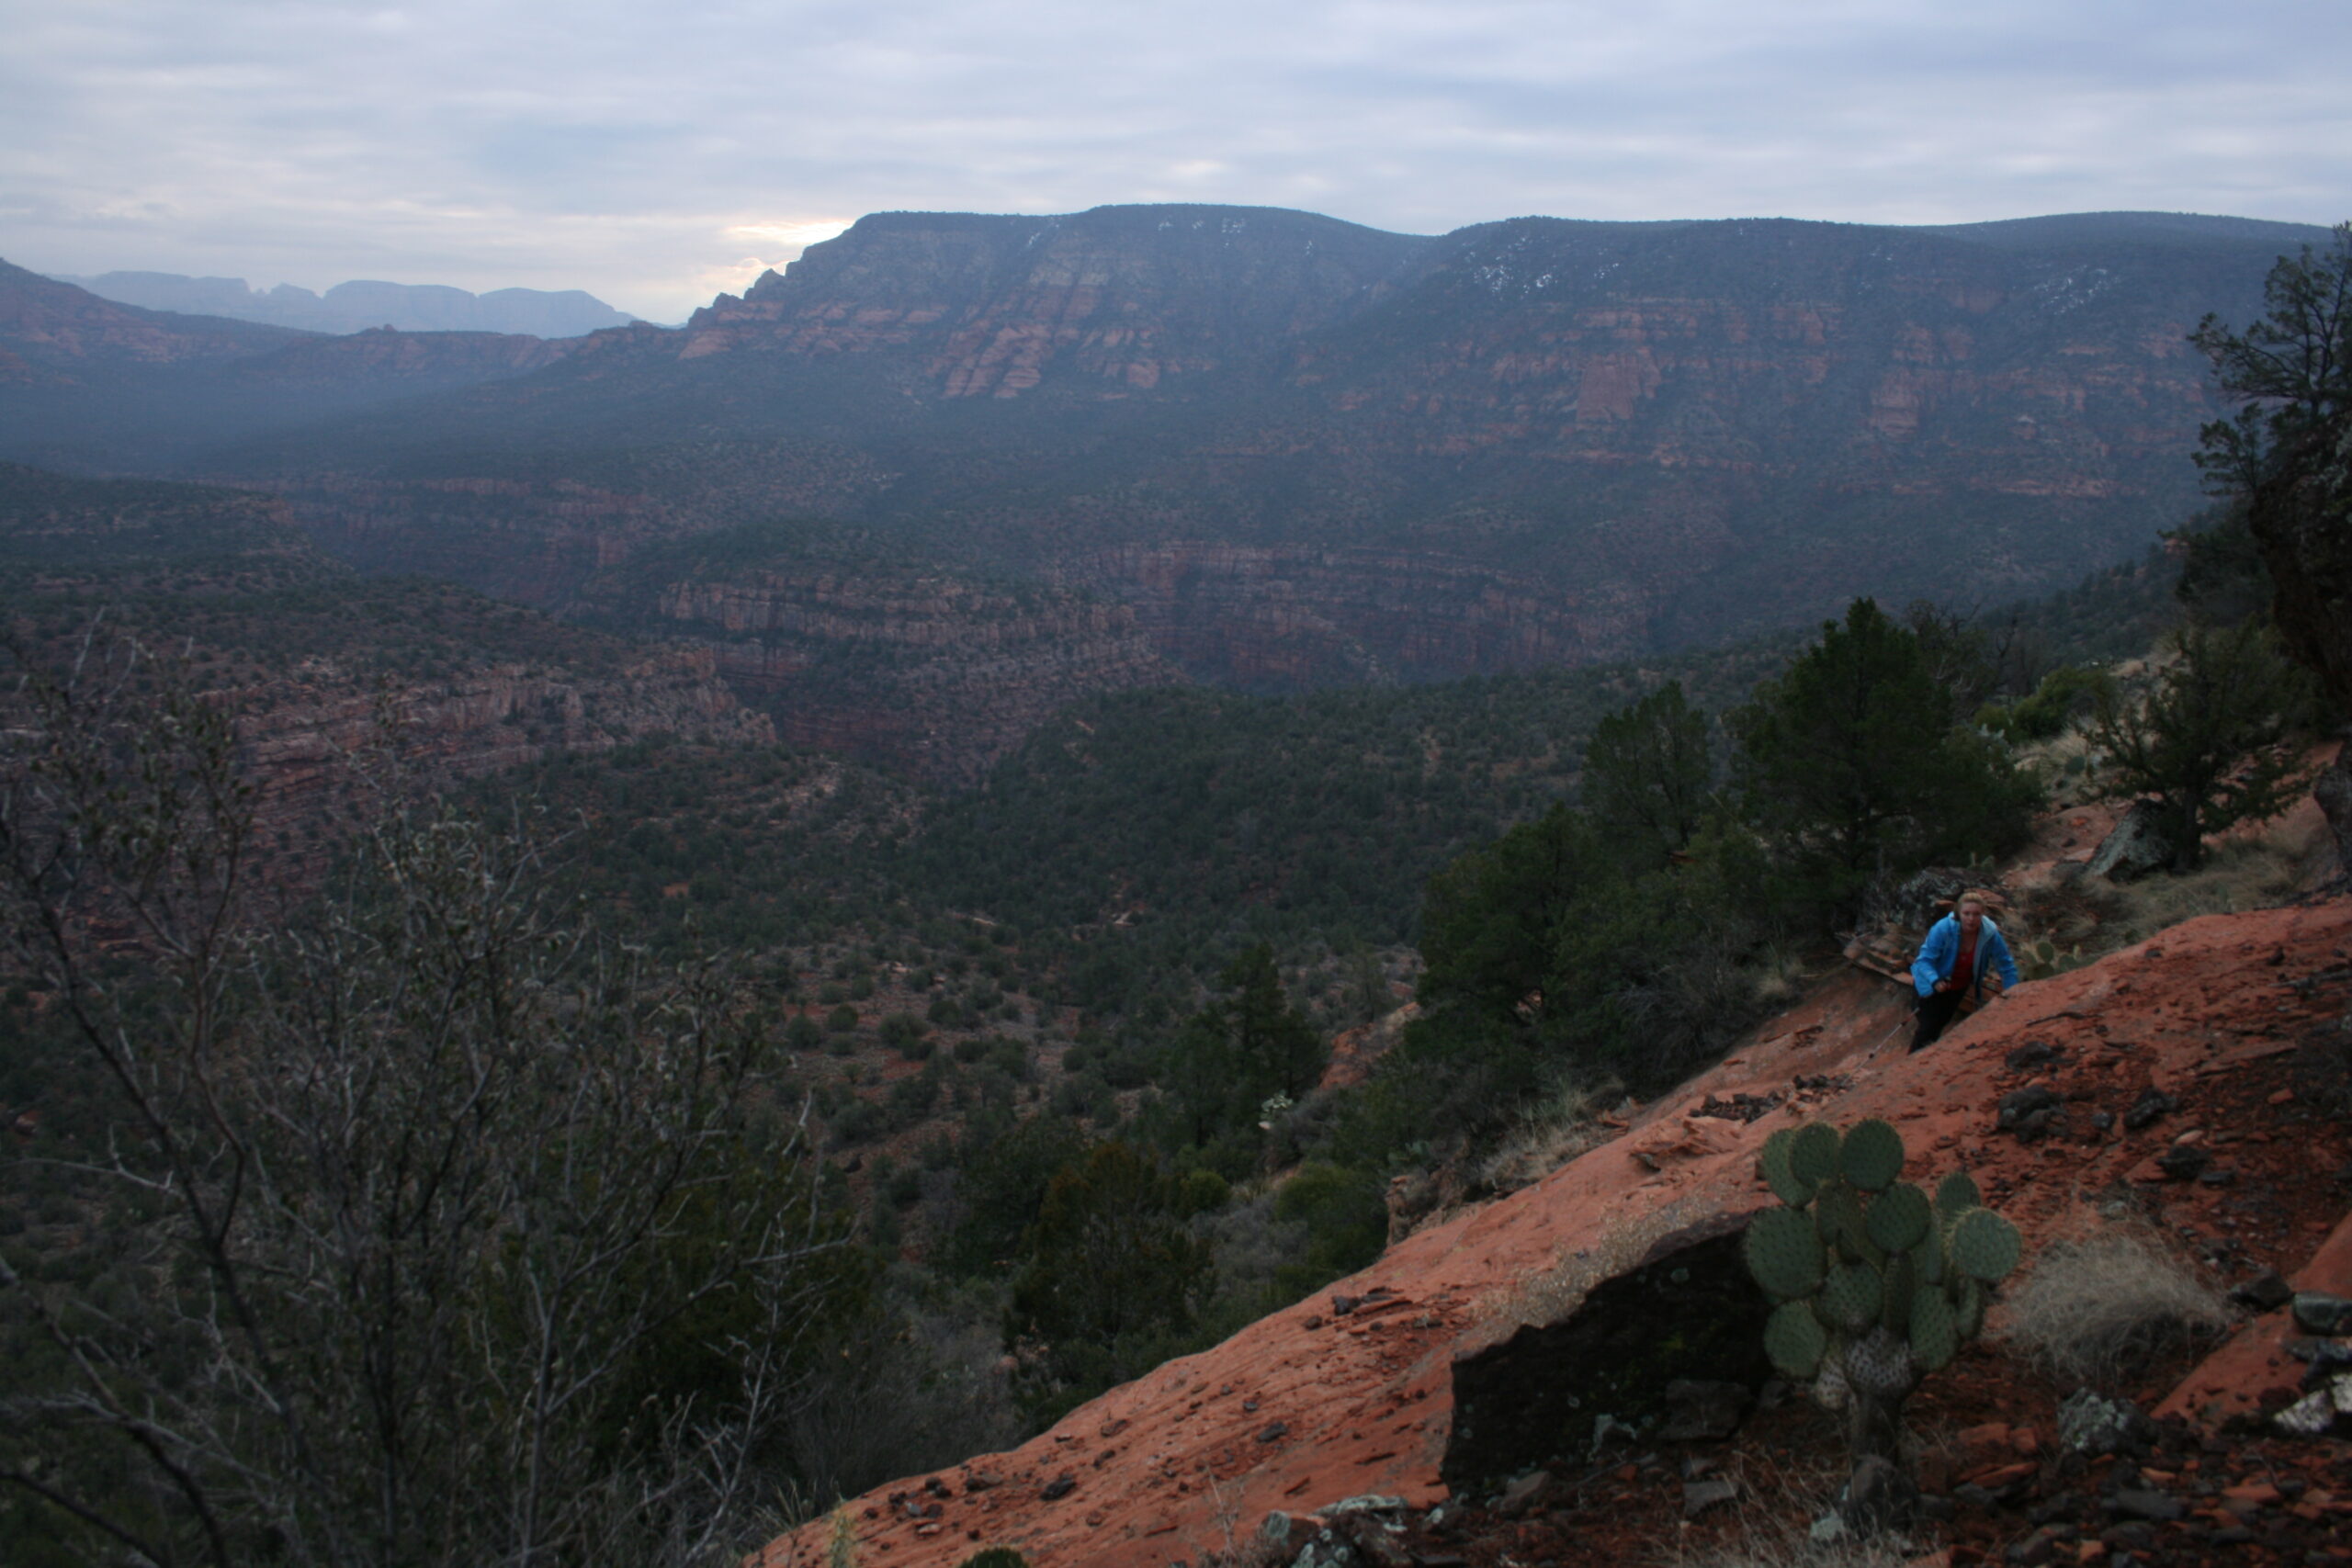 Wendy scales a sandstone ridge toward the rim of Sycamore Canyon.